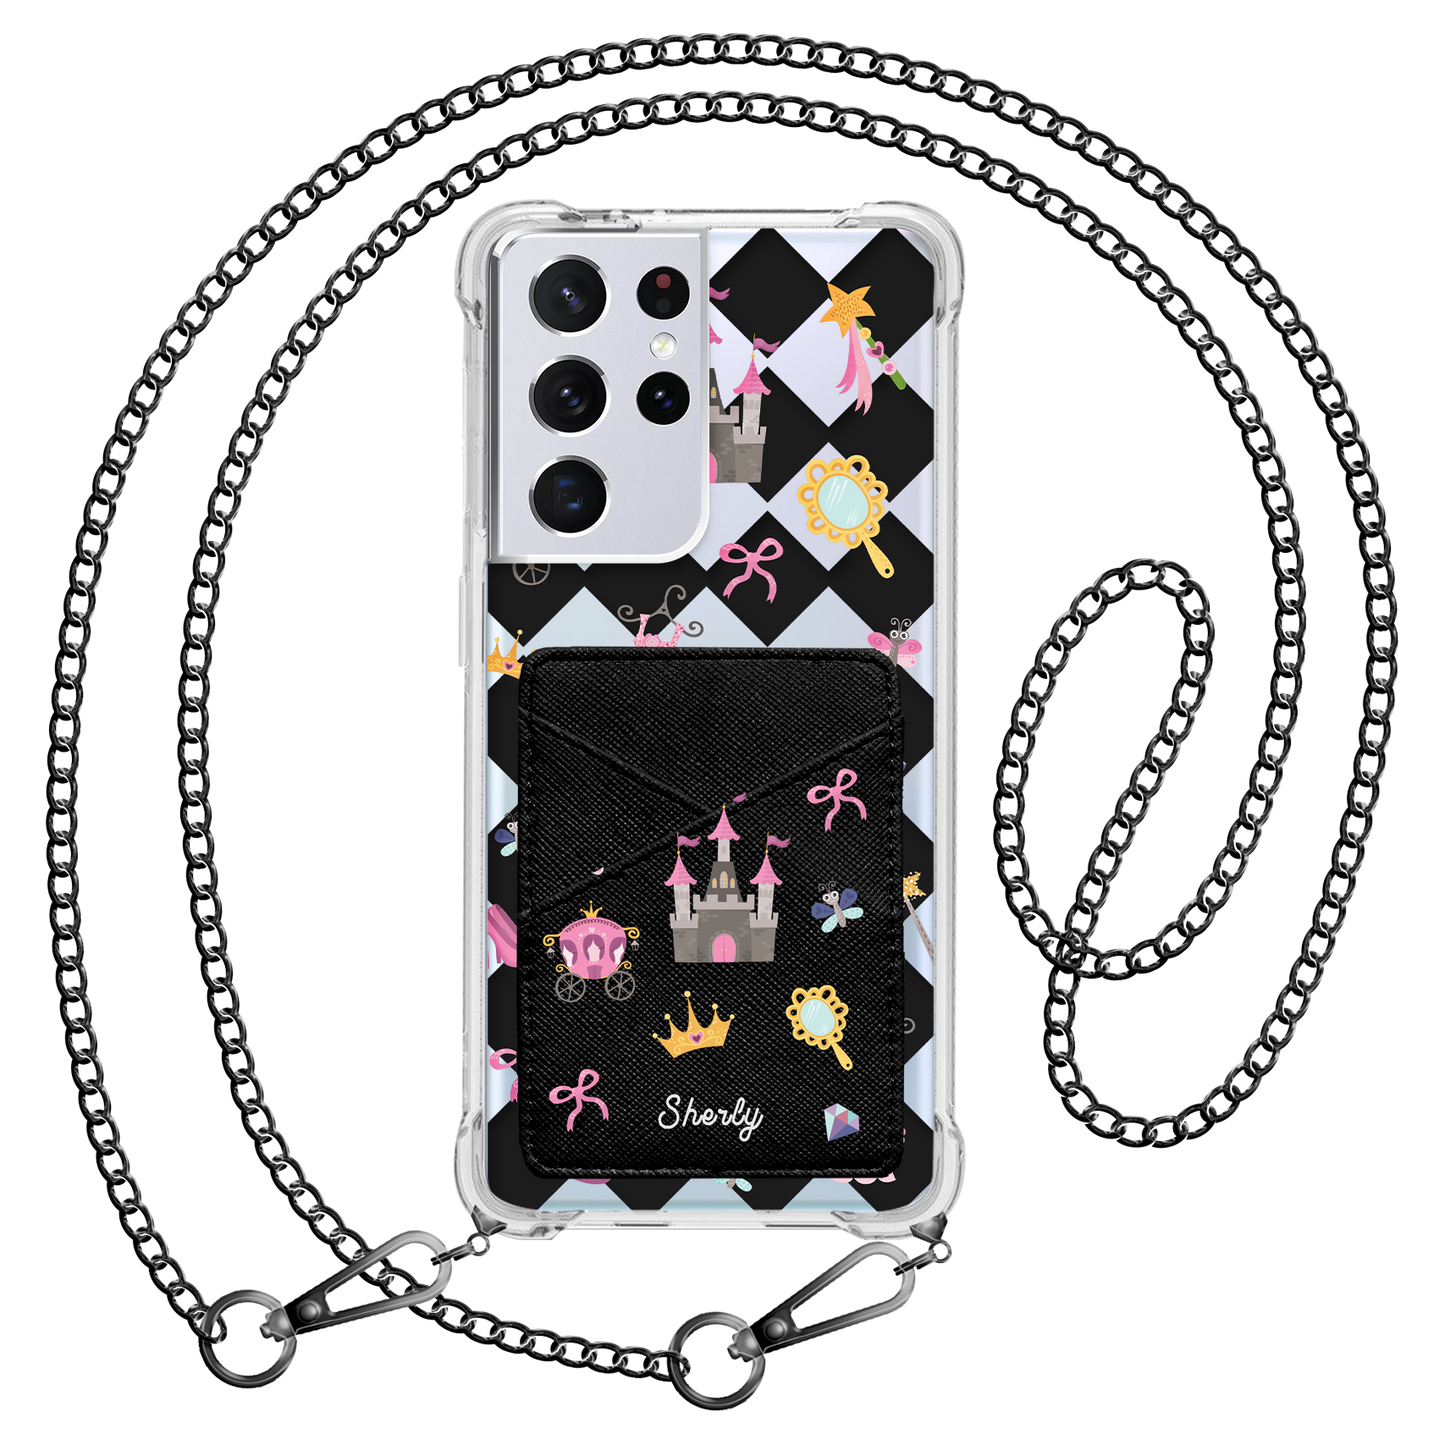 Android Phone Wallet Case - Little Princess